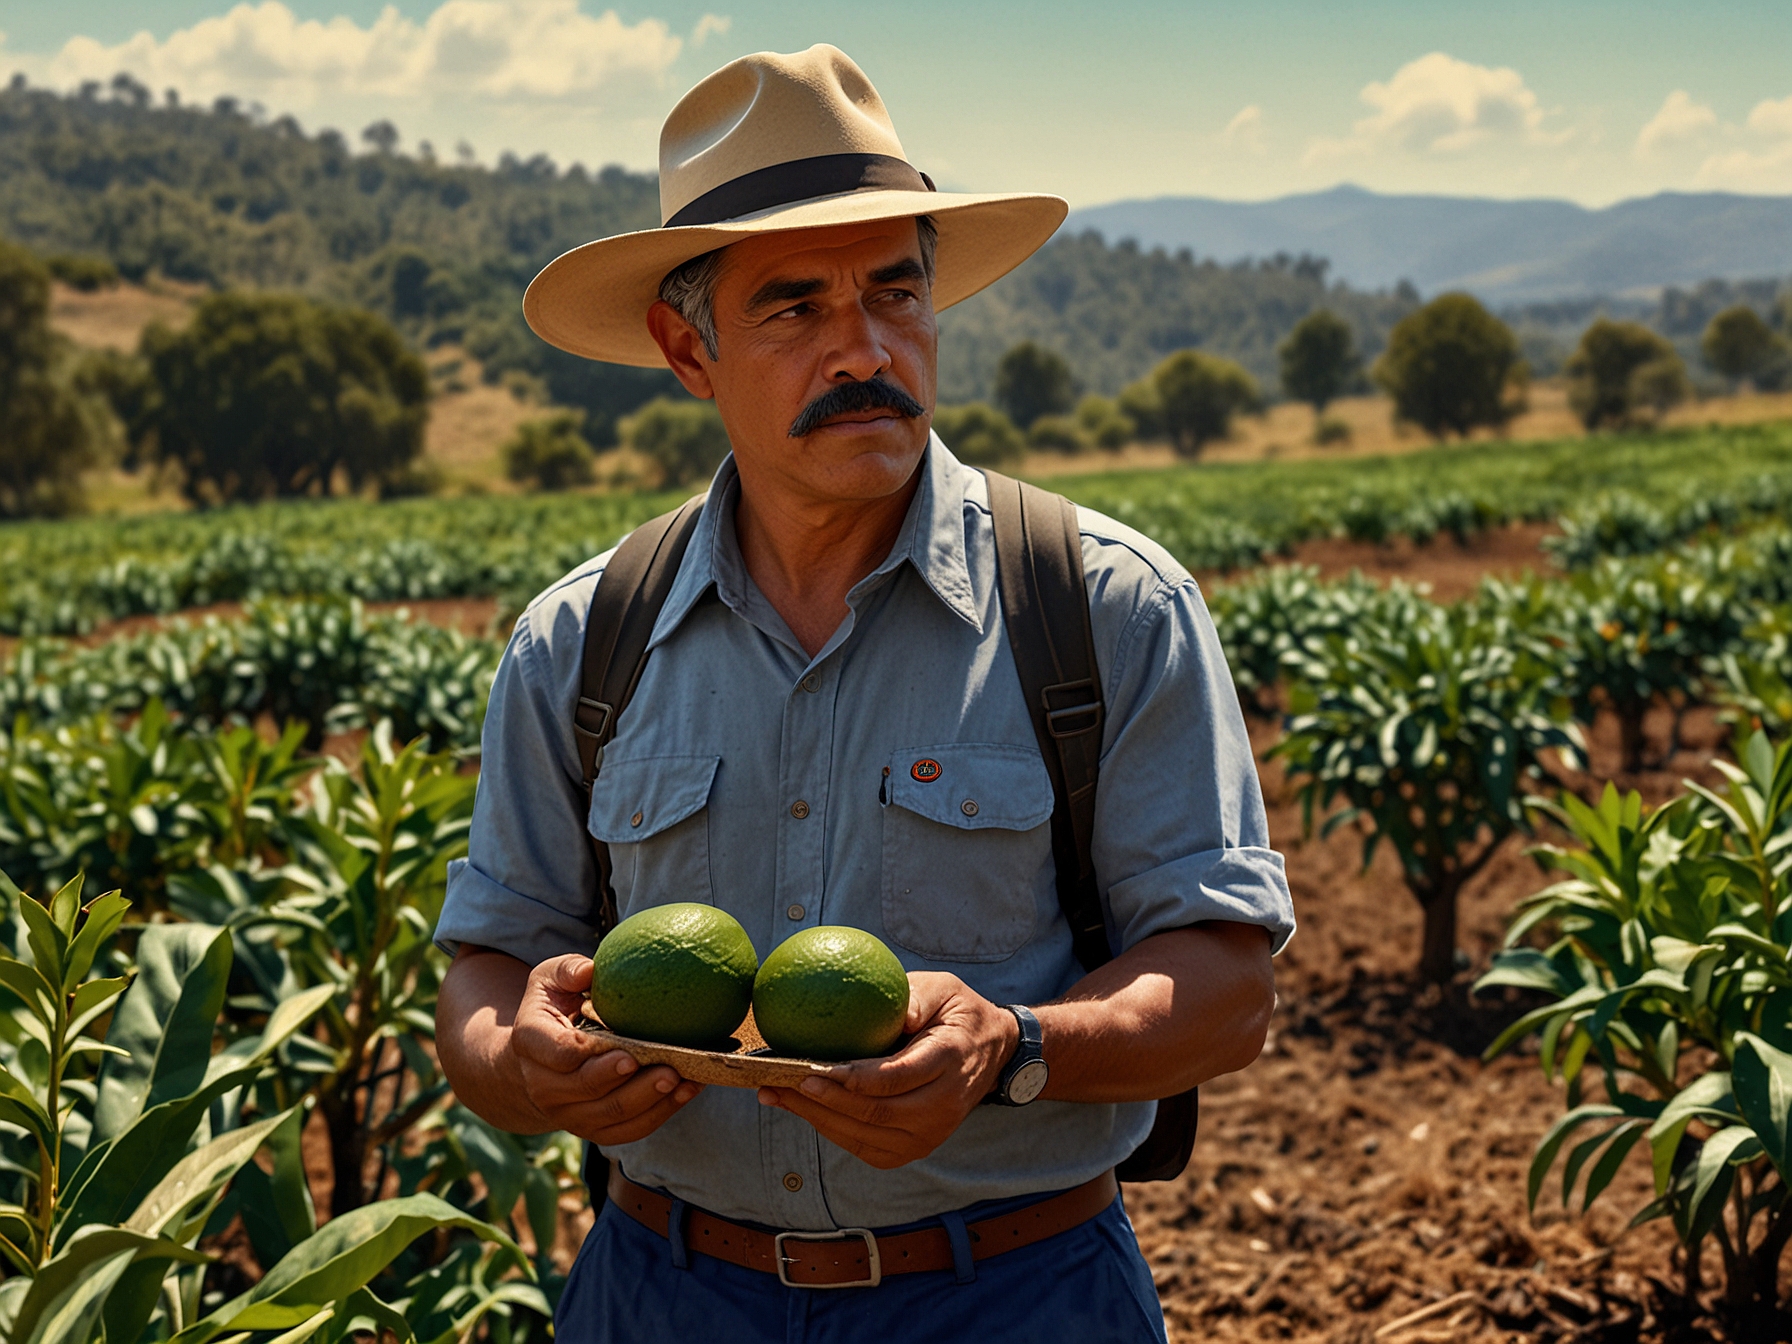 A US agricultural inspector examines avocados in a field in Michoacan, Mexico, highlighting the region's significance in producing avocados for export to the United States.